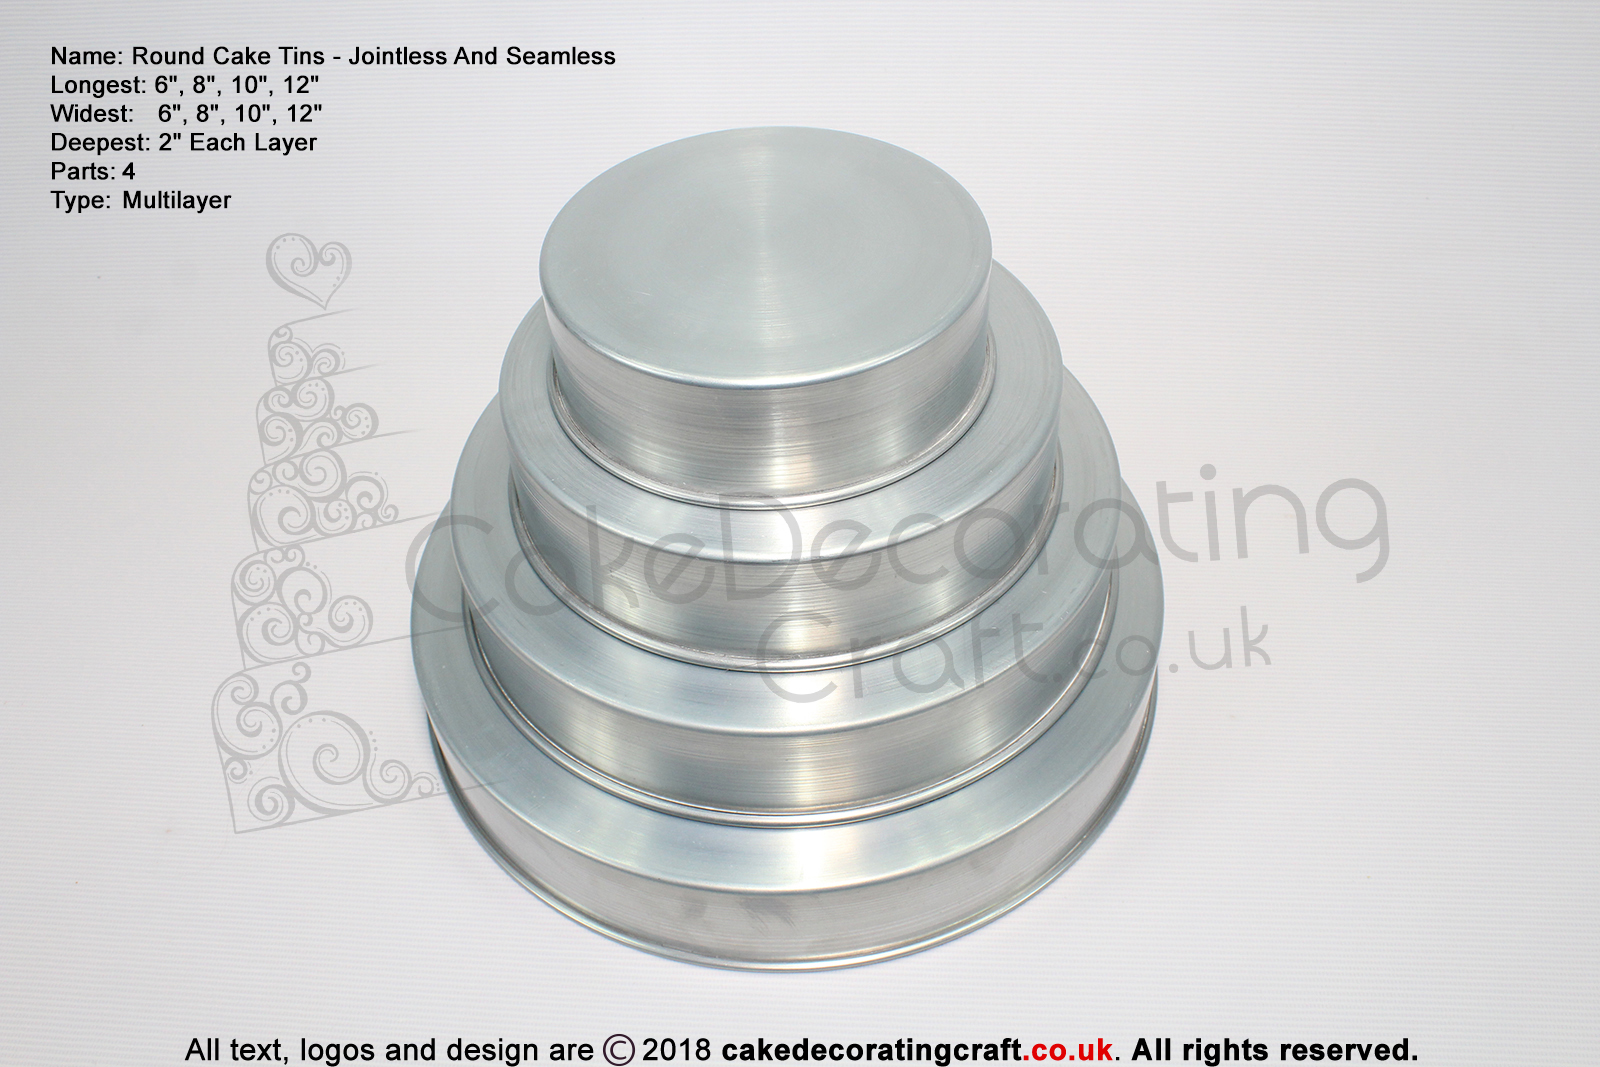 Round Cake Baking Tin | 2" Deep | Size 6 8 10 12 " | 4 Tiers | Jointless And Seamless | Rainbow | Multi Layer